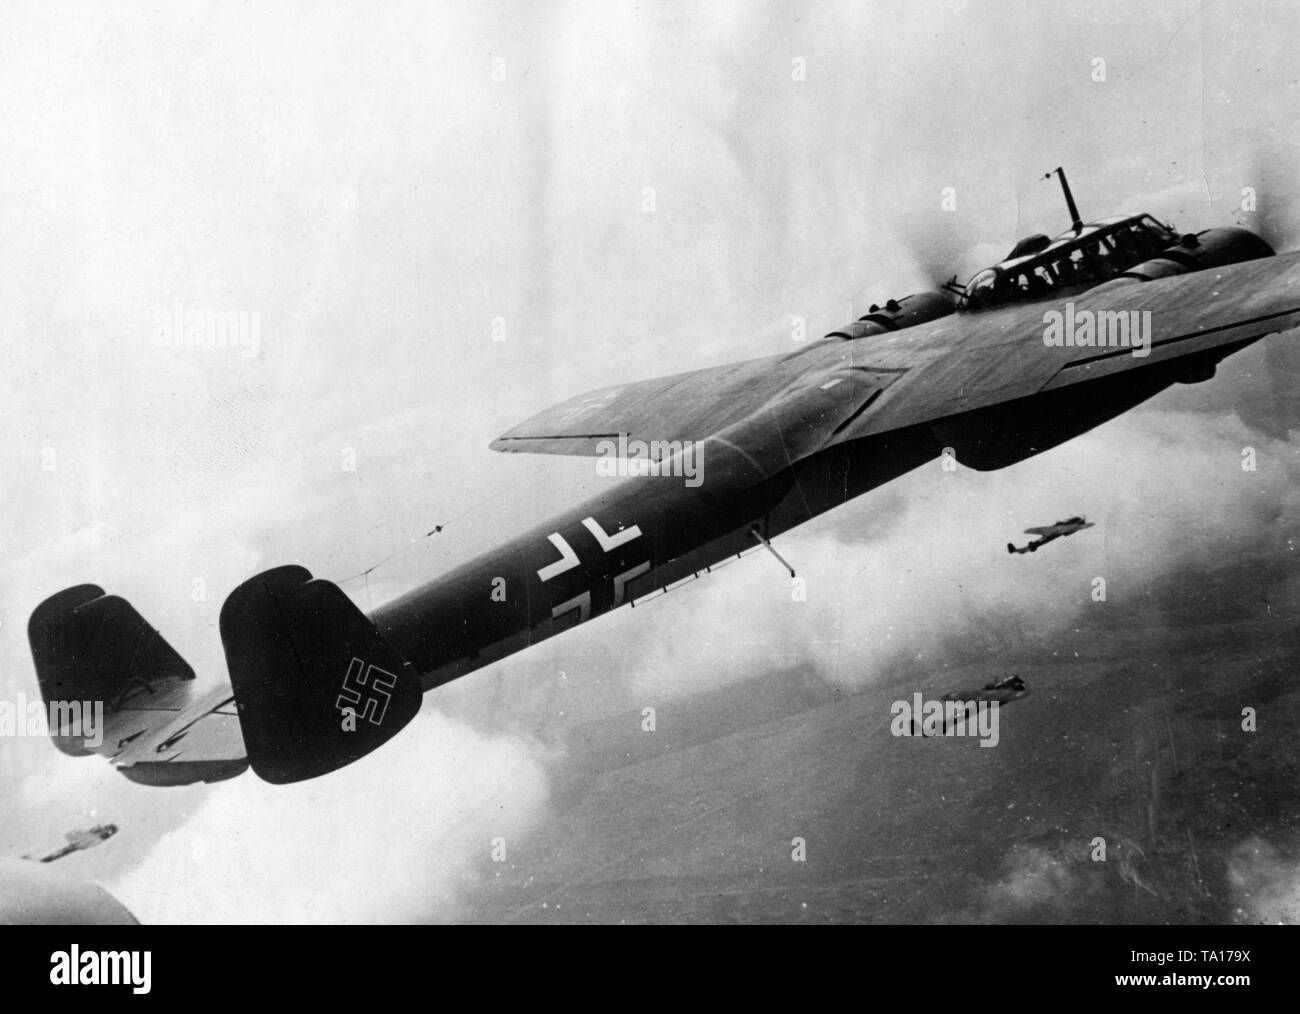 A wing of the Luftwaffe (Dornier Do 17 bomber aircrafts) as air support in the Battle of France, May 1940. Photo: war correspondent Stempka. Stock Photo